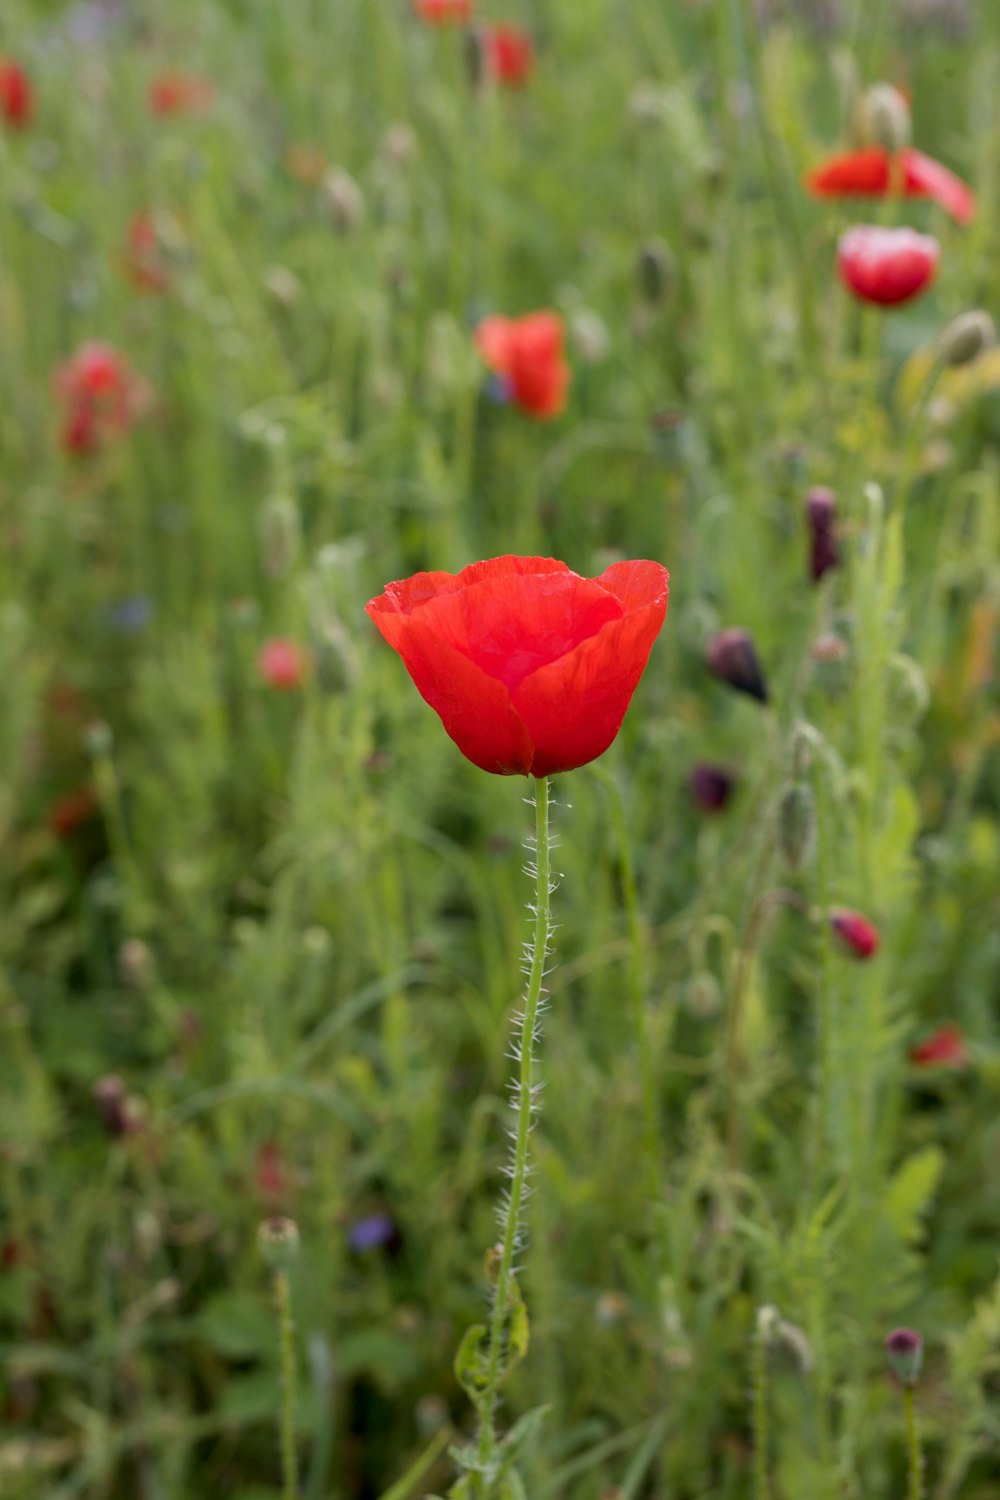 a red poppy in a field of green grass